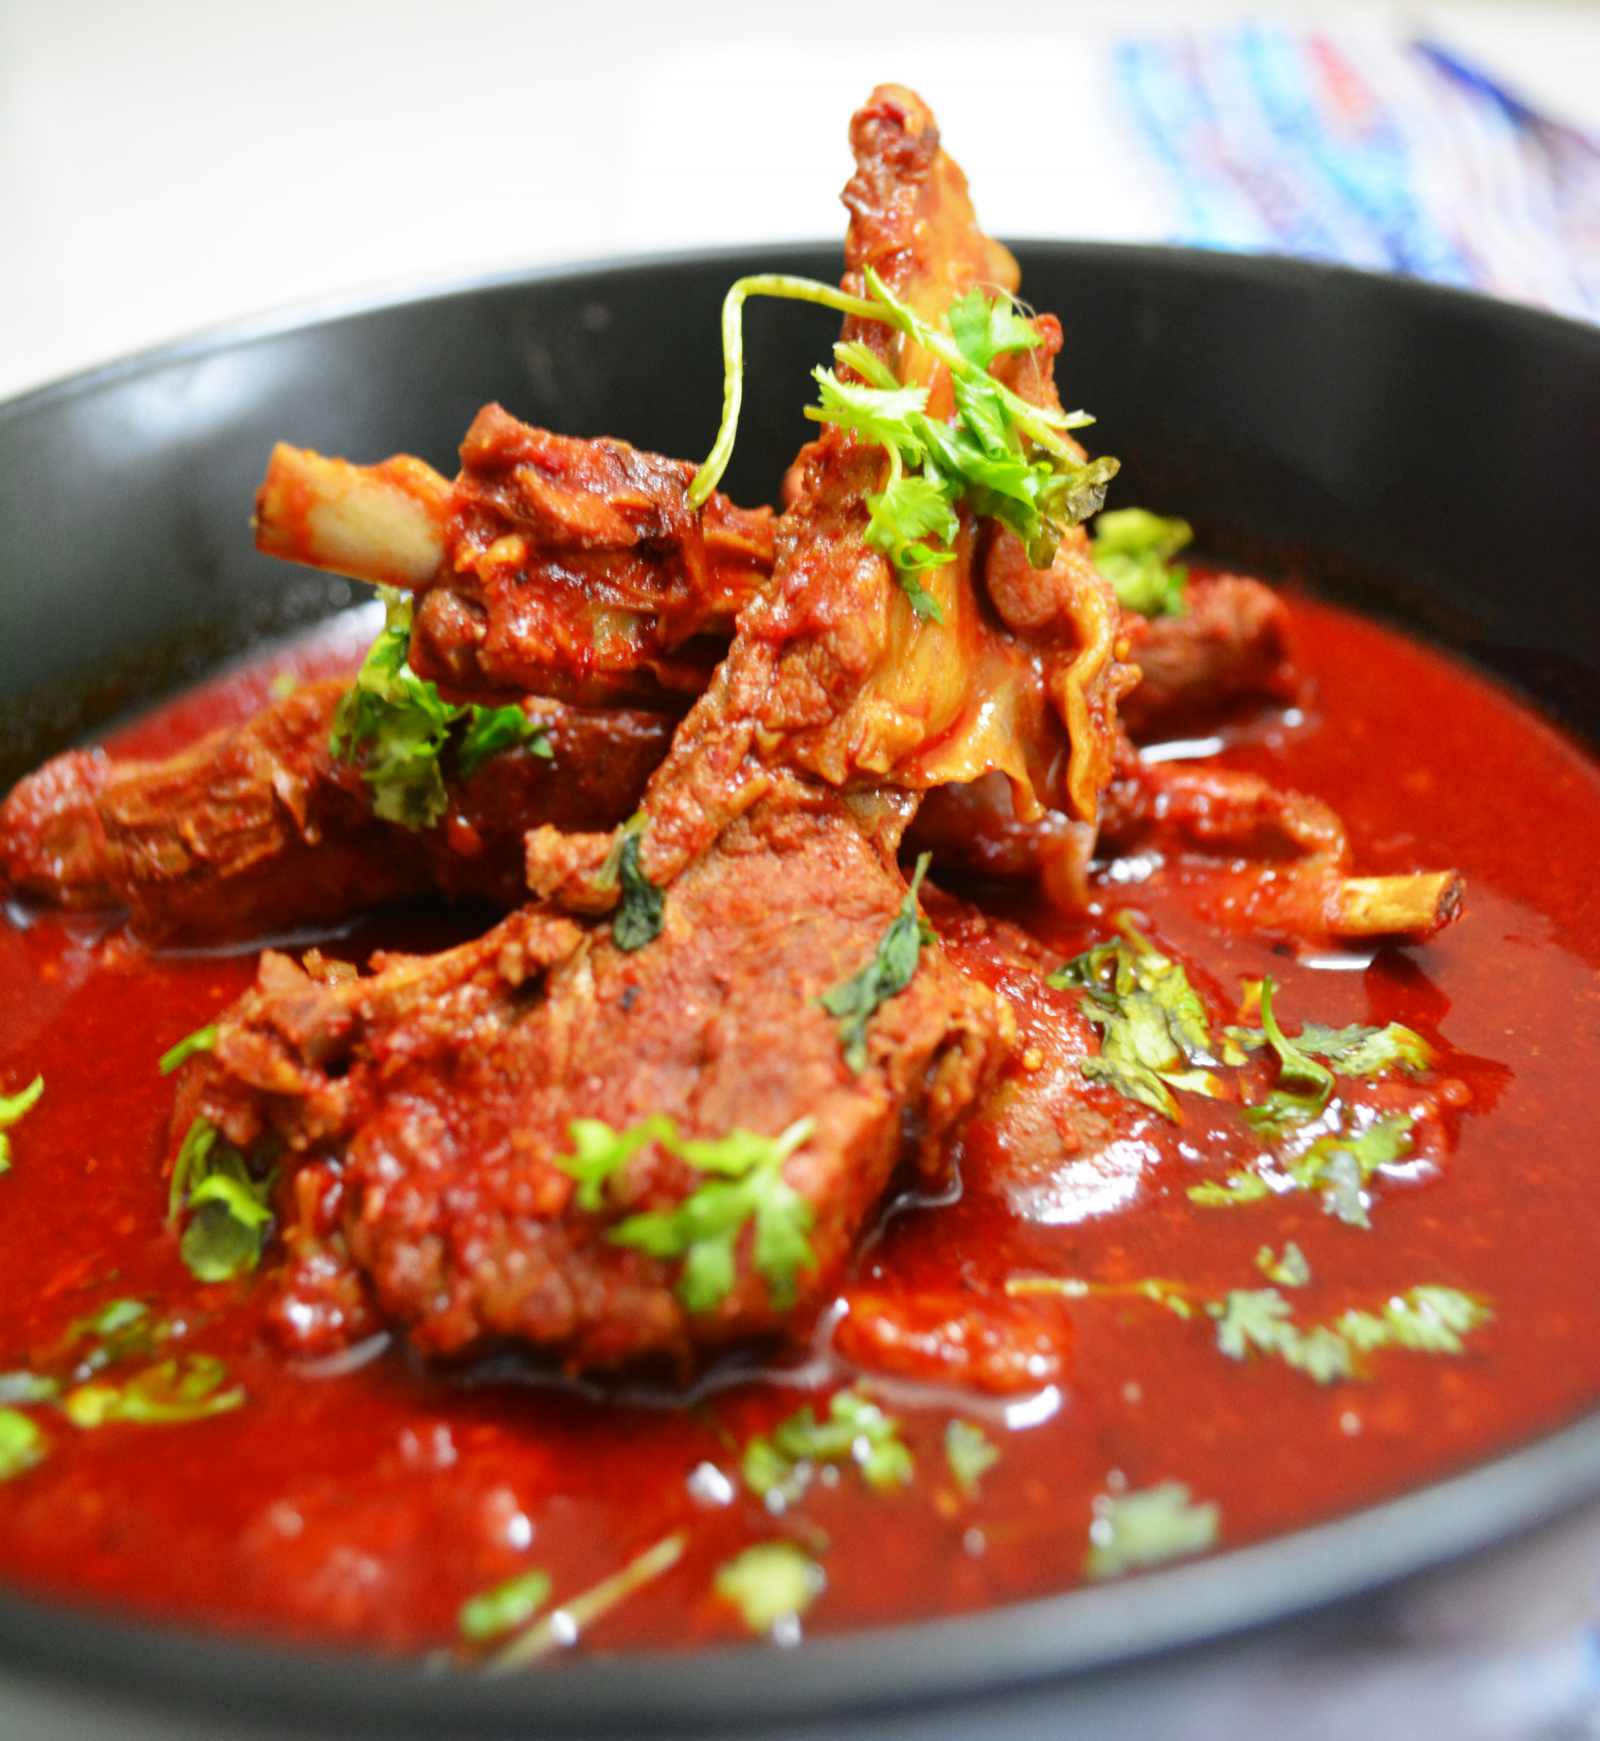 Rajasthani Laal Maas Recipe-Mutton In Red Spicy Gravy by Archana's Kitchen